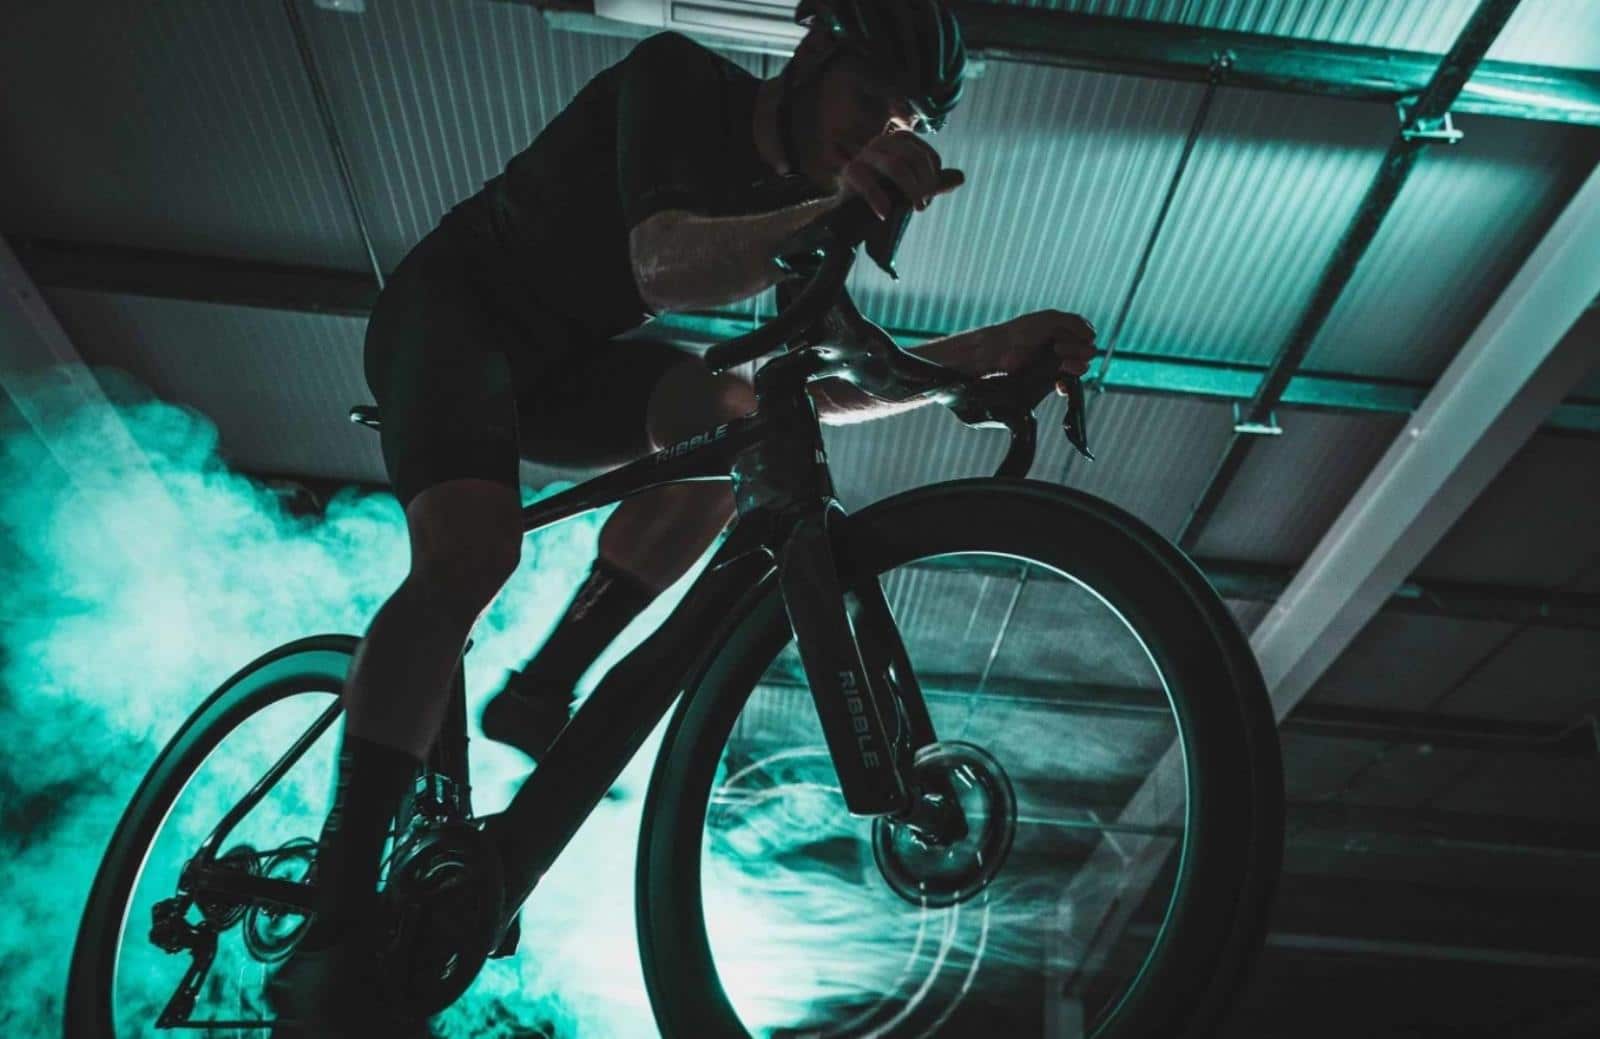 Ribble wanted to create the fastest bike in the world.  The result is the Ultra SL R